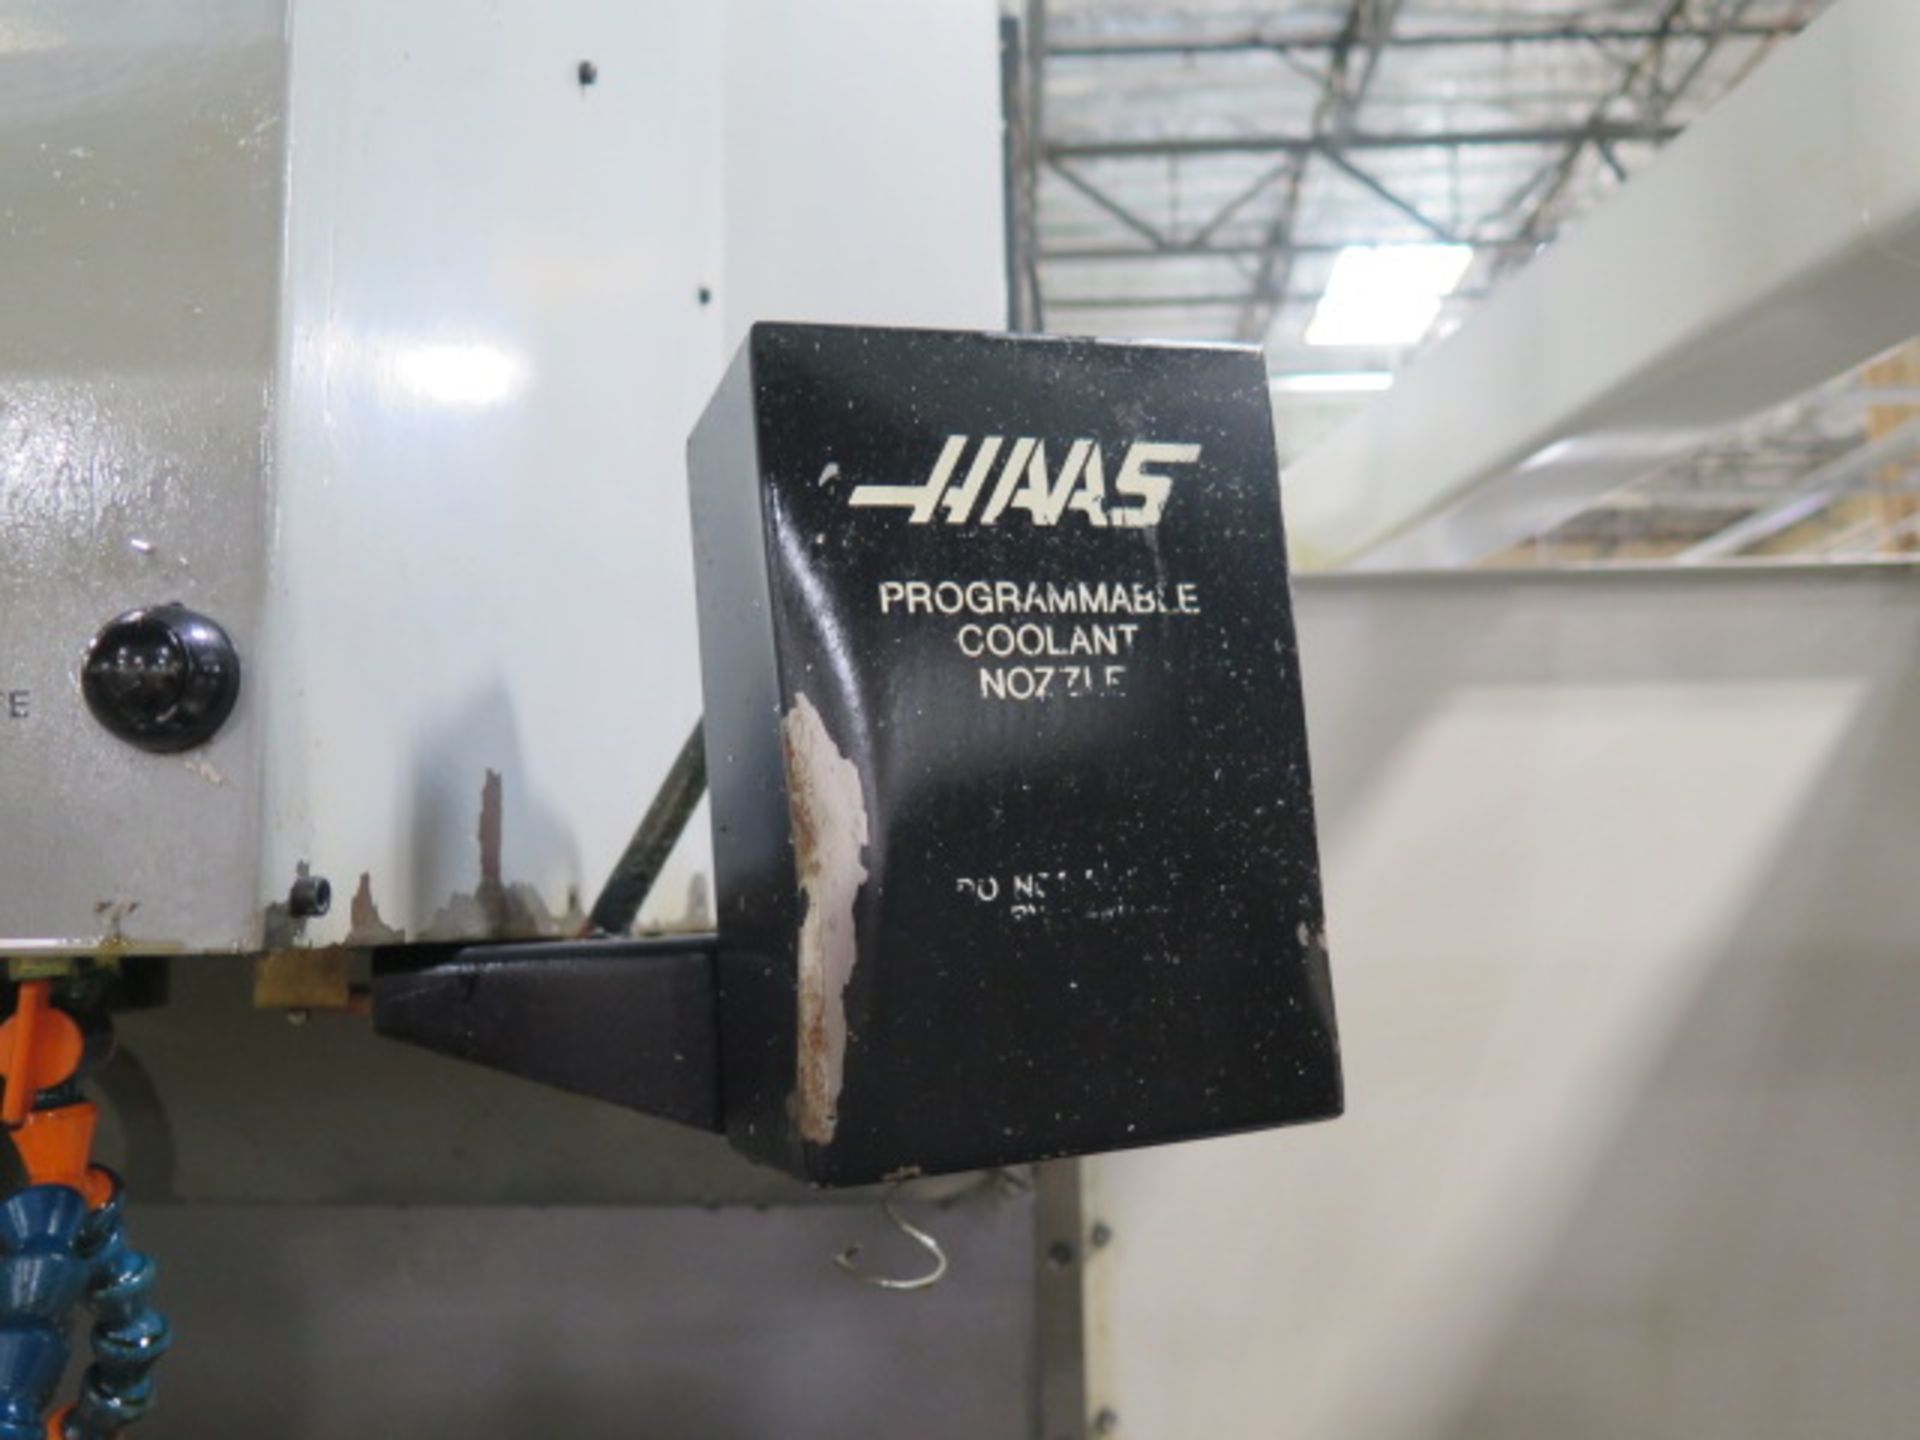 1997 Haas VF-3 4-Axis CNC Vertical Machining Center s/n 10188 w/ Haas Controls, 20-Station ATC, BT- - Image 8 of 18